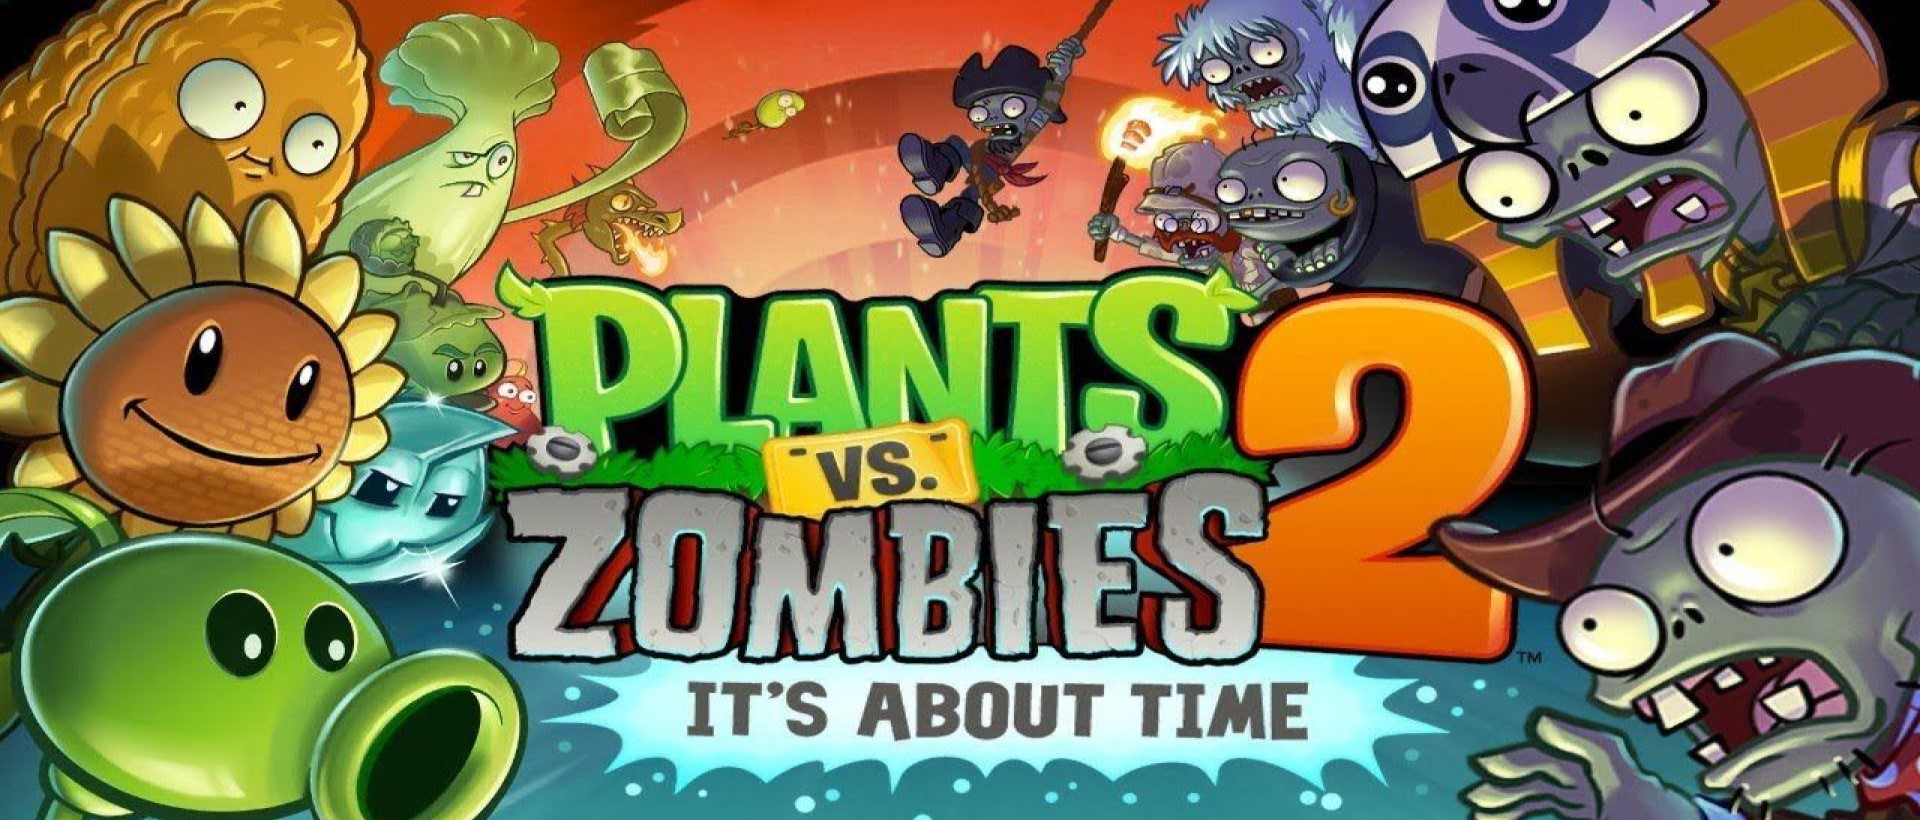 Free download game plant vs zombie 2 for pc